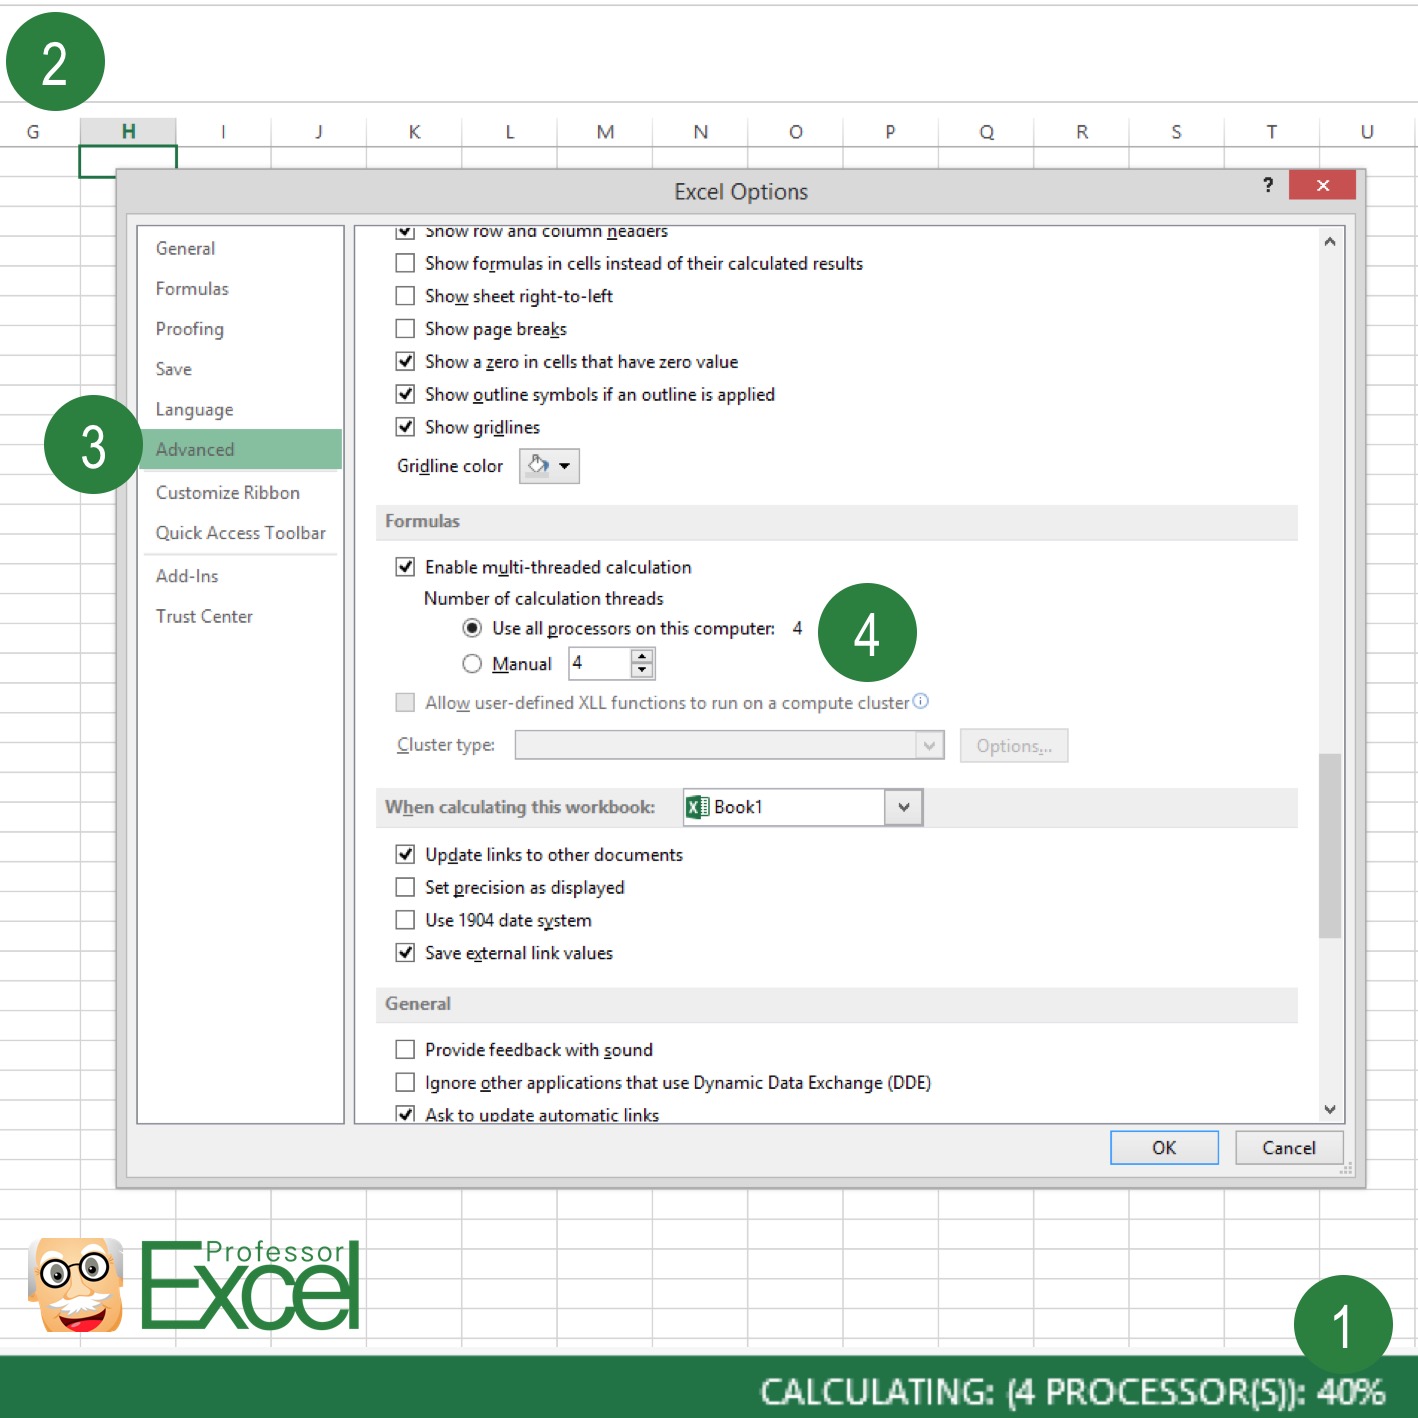 excel, calculate, all, processors, cores, speed up excel